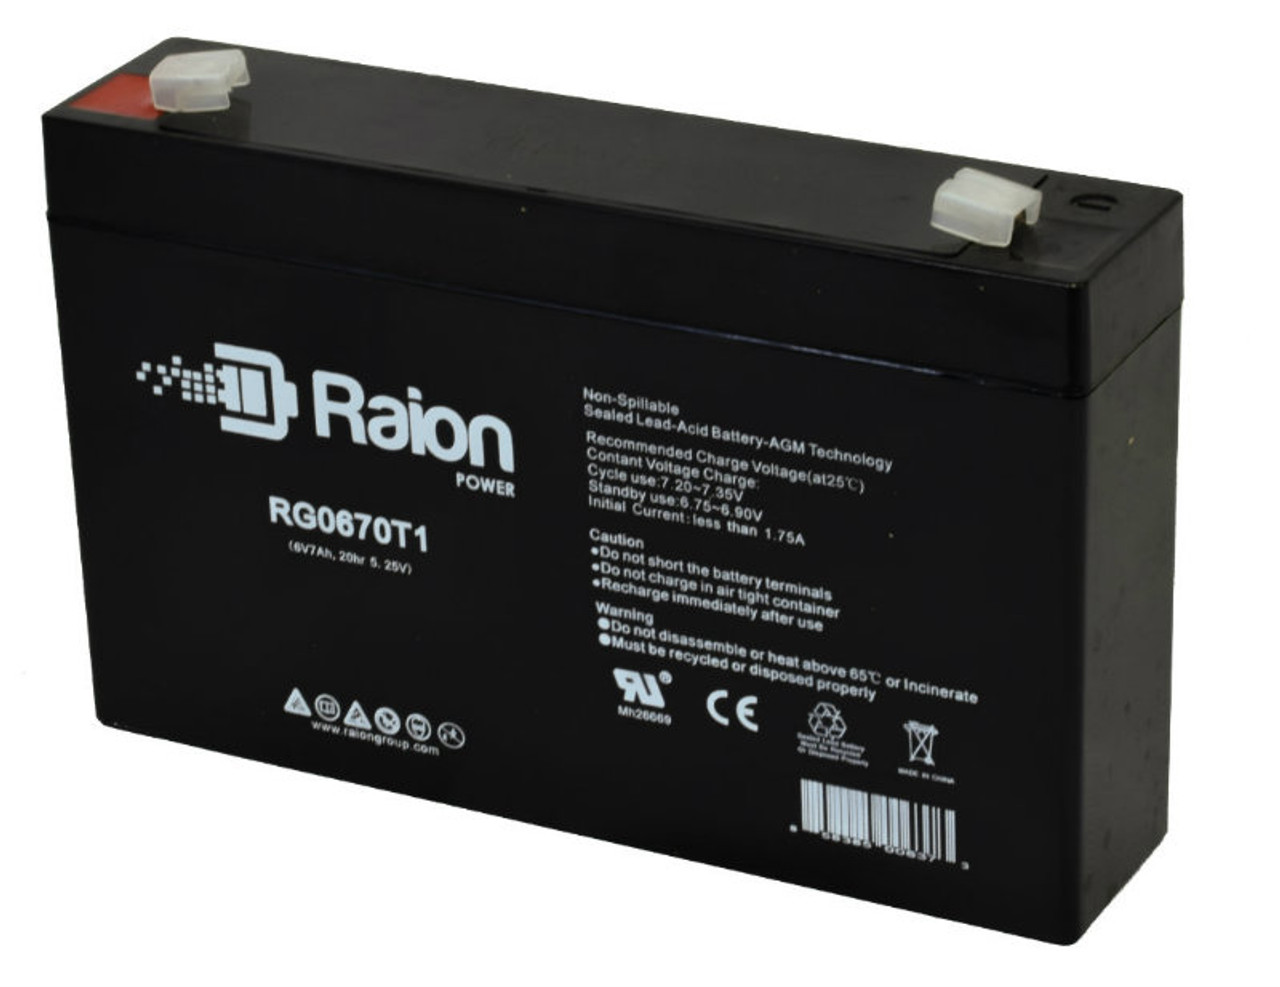 Raion Power RG0670T1 6V 7Ah Replacement Emergency Lighting Battery for Chloride XS1